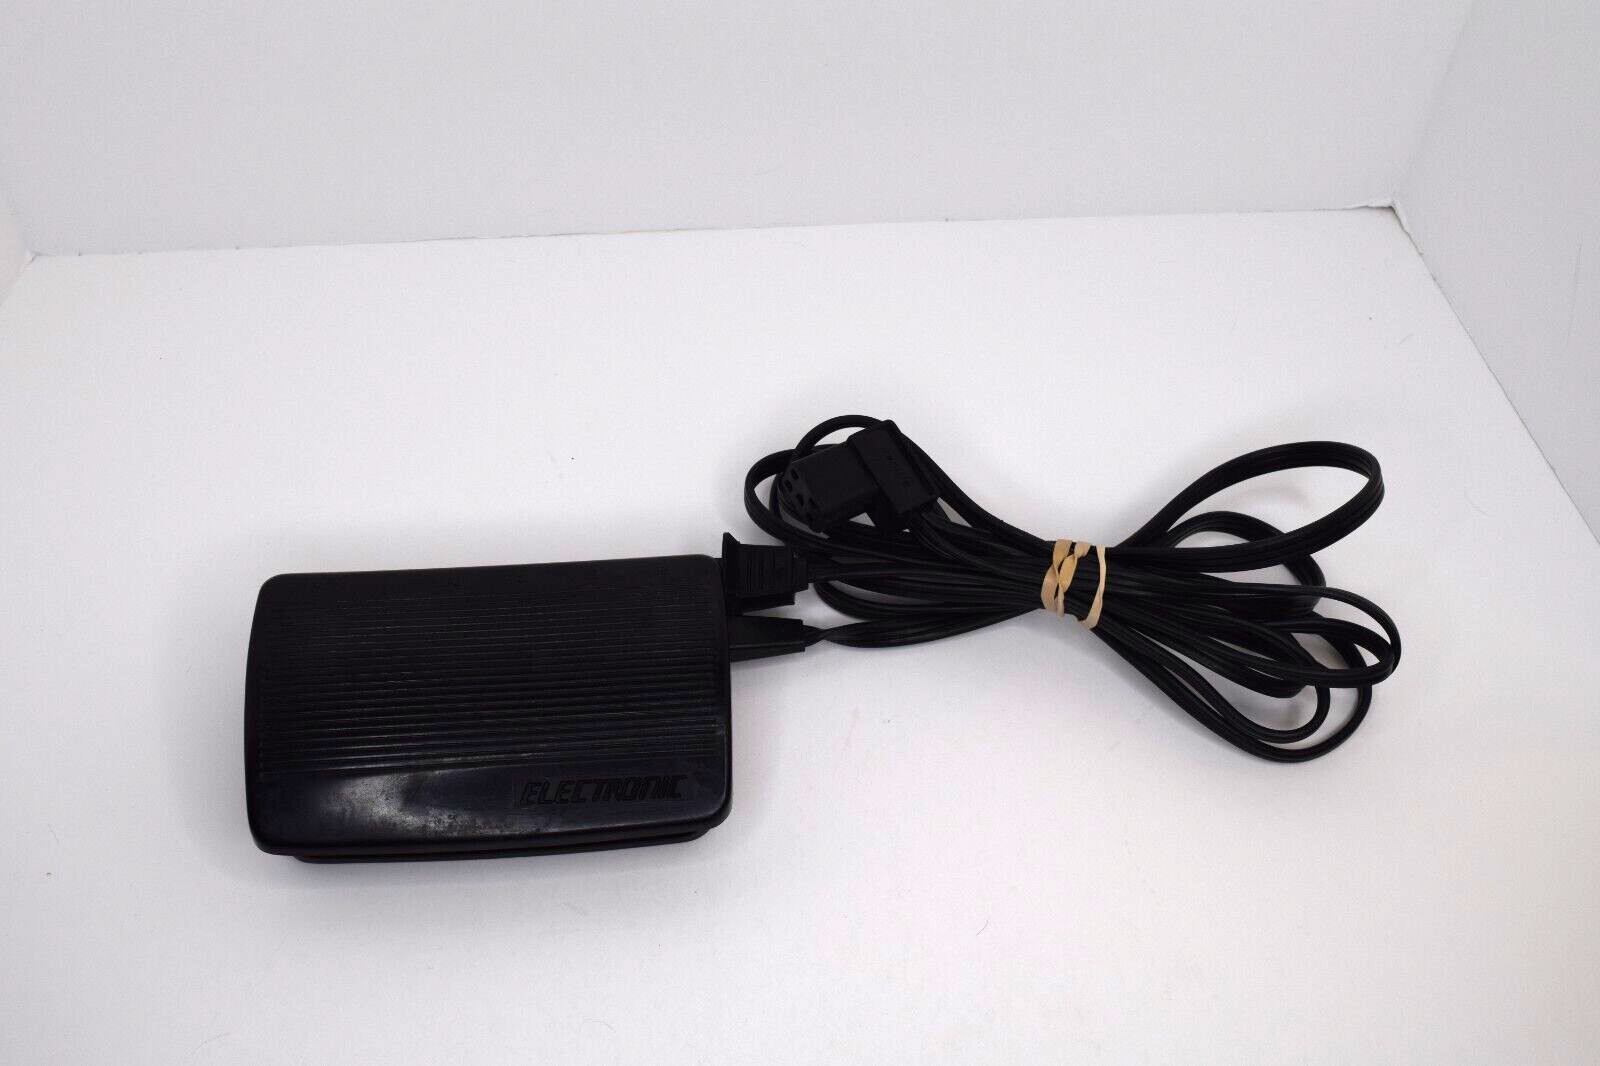 Primary image for Singer Sewing Machine Electronic Foot Pedal CR509 5-Pin 604651-029